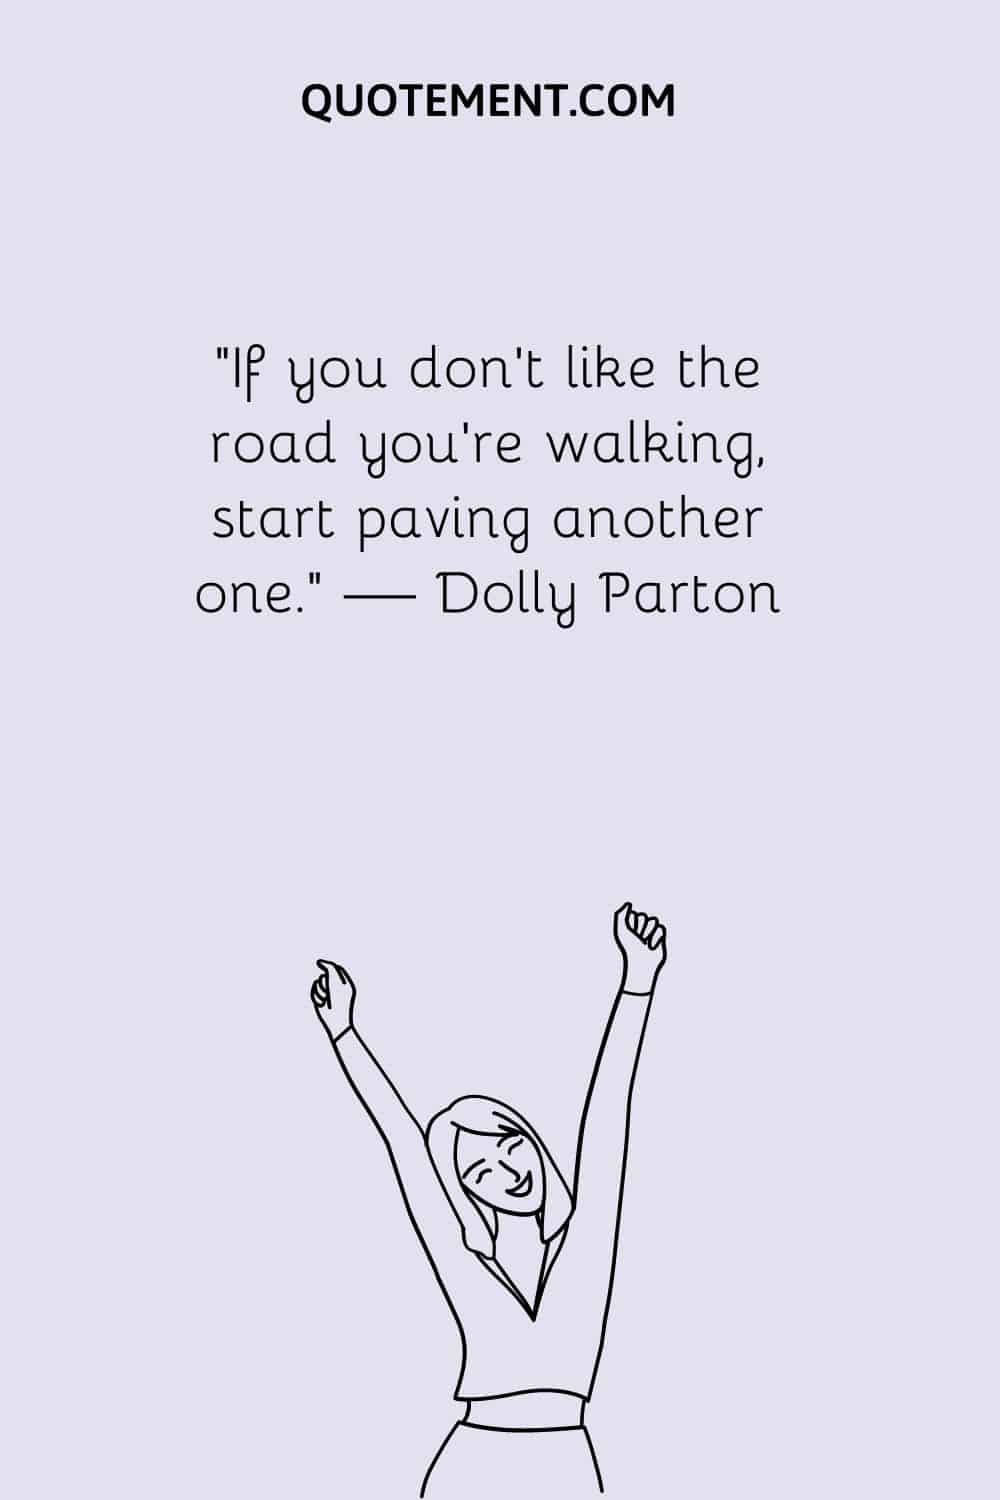 If you don’t like the road you’re walking, start paving another one